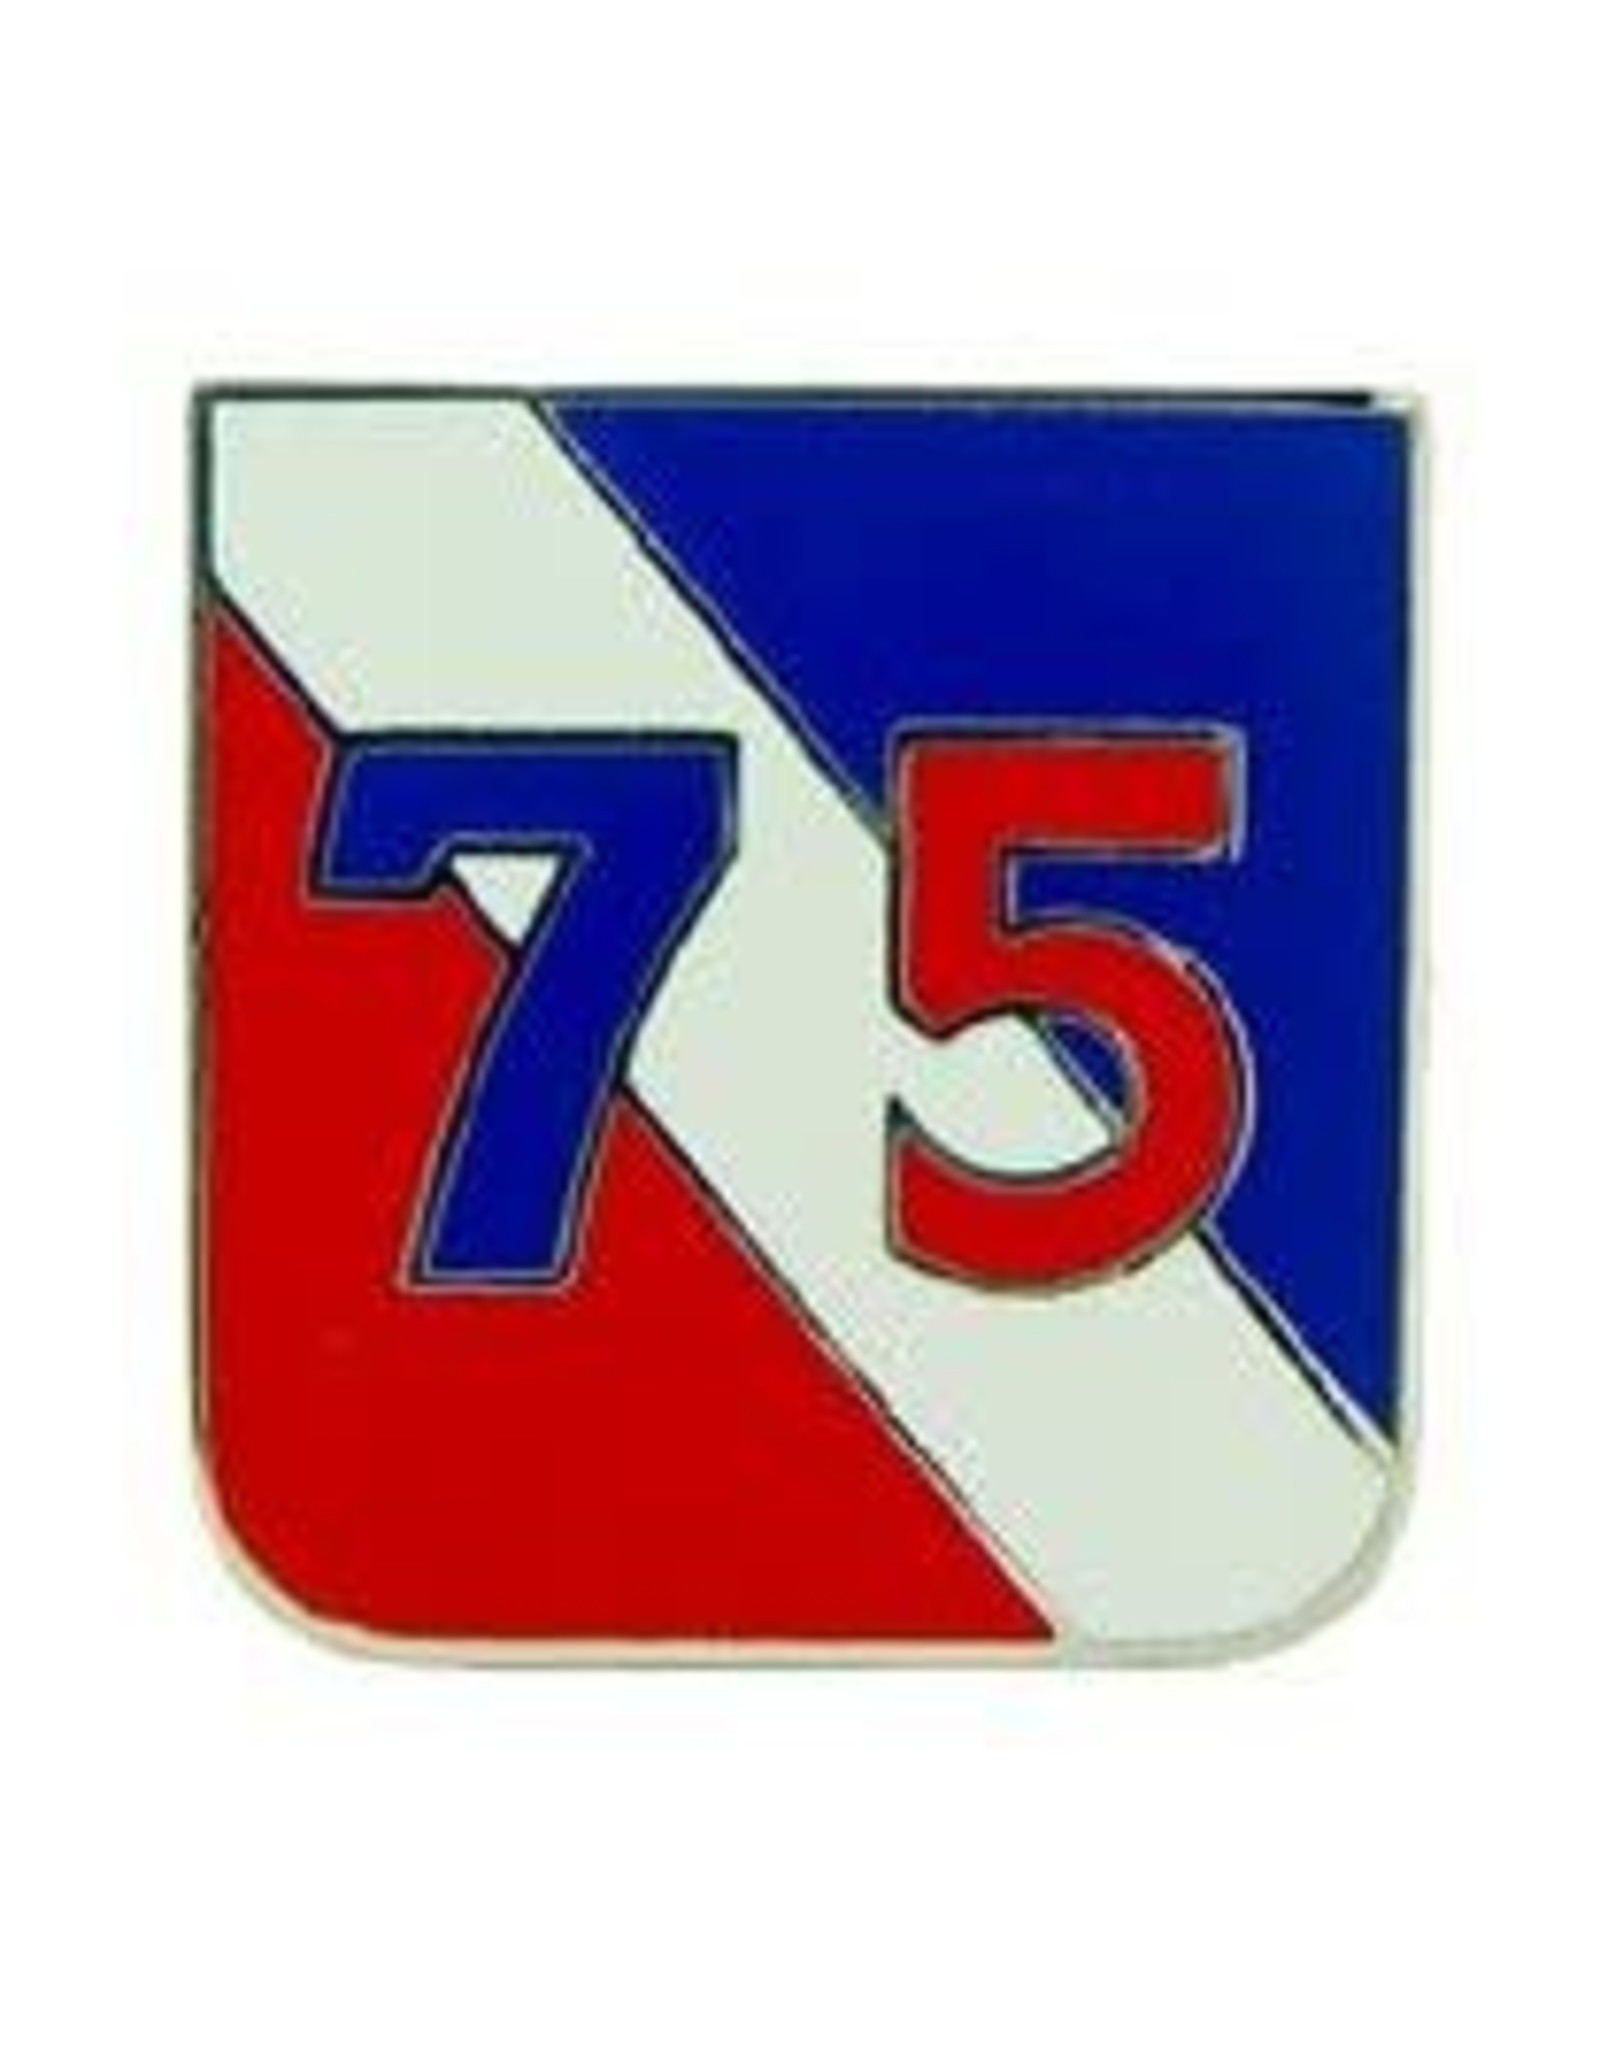 Pin - Army 75th Infantry Division